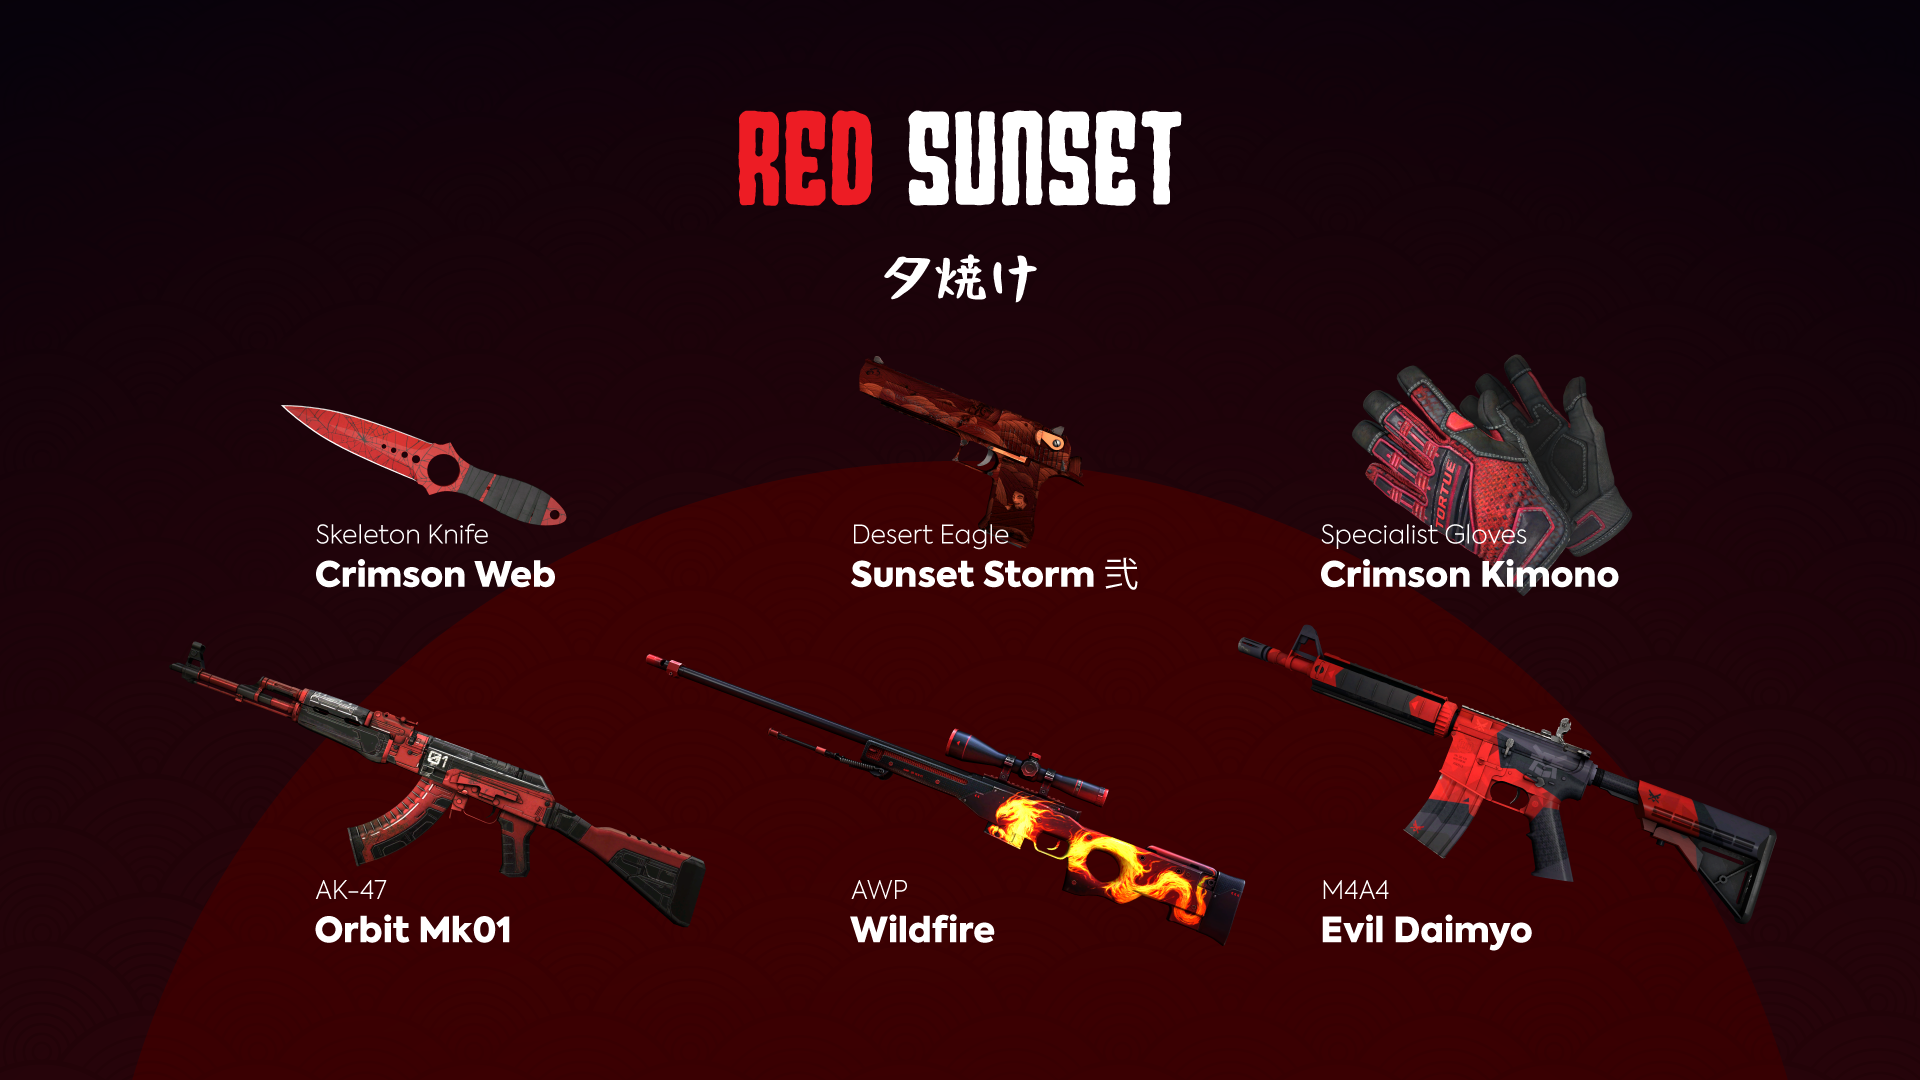 RED SUNSET 2020 | RED with KNIFE - CS.MONEY BLOG